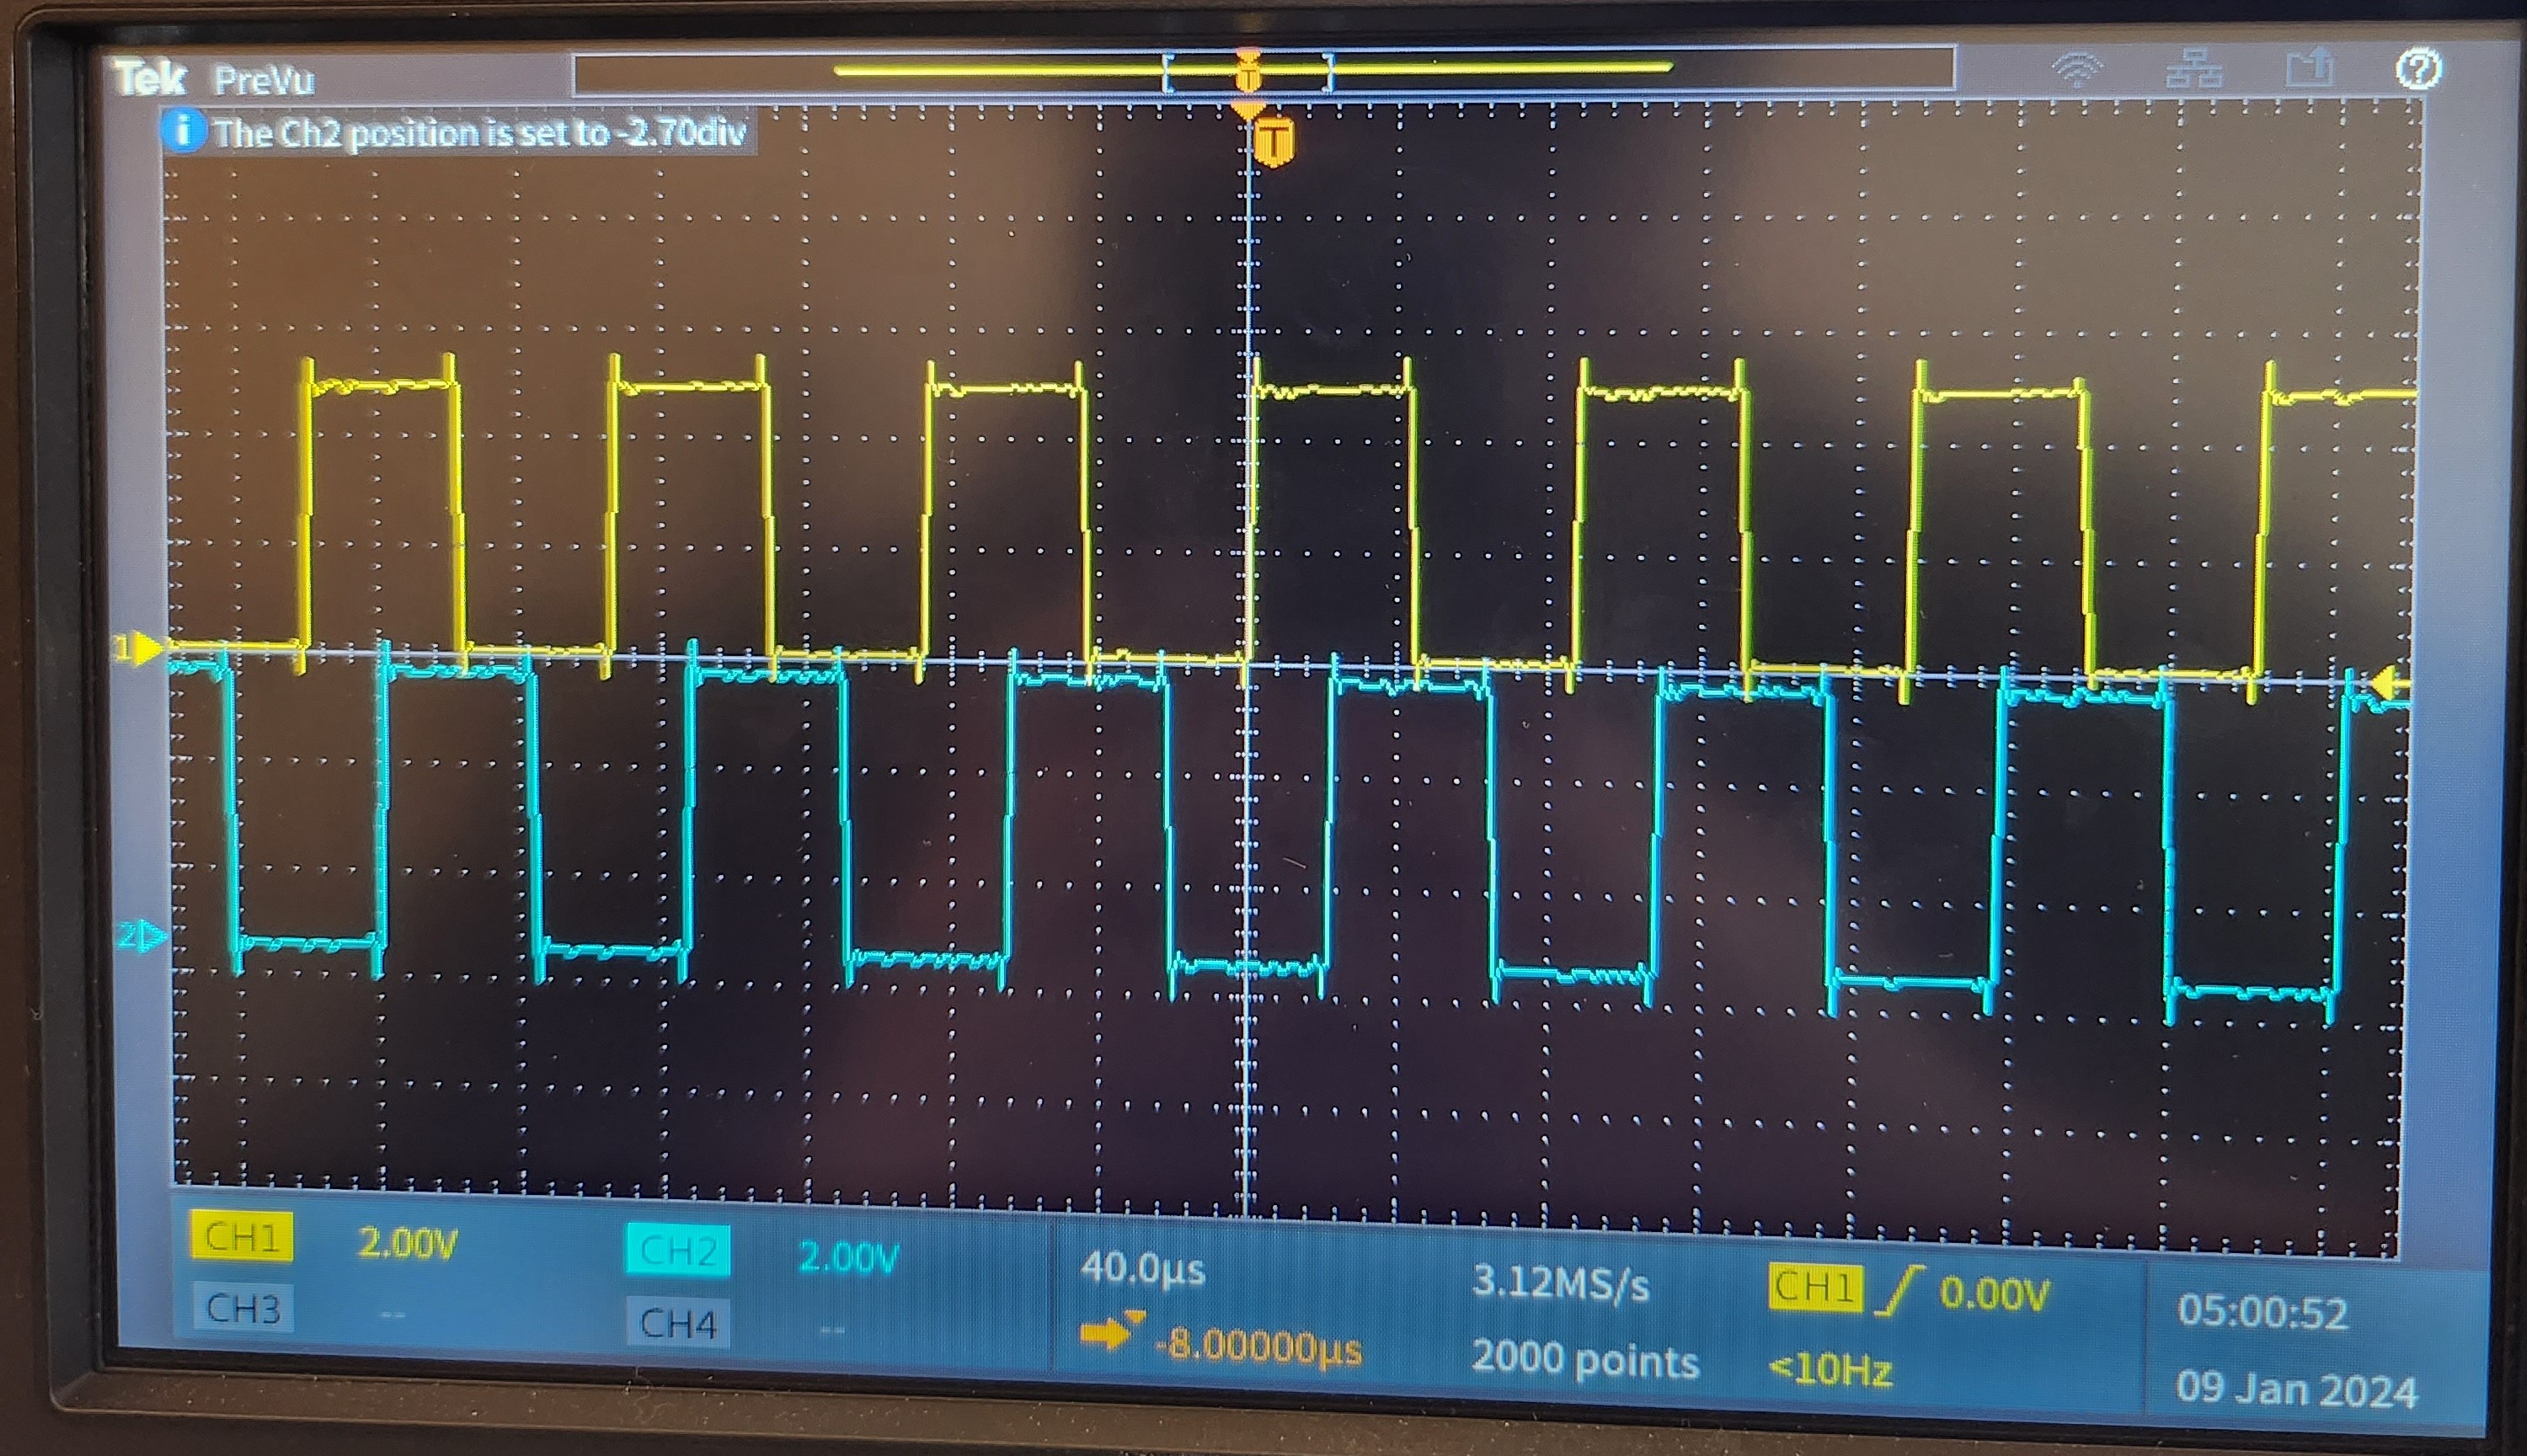 Main pulse train and quadrature pulse train shown 90 degrees out of phase.